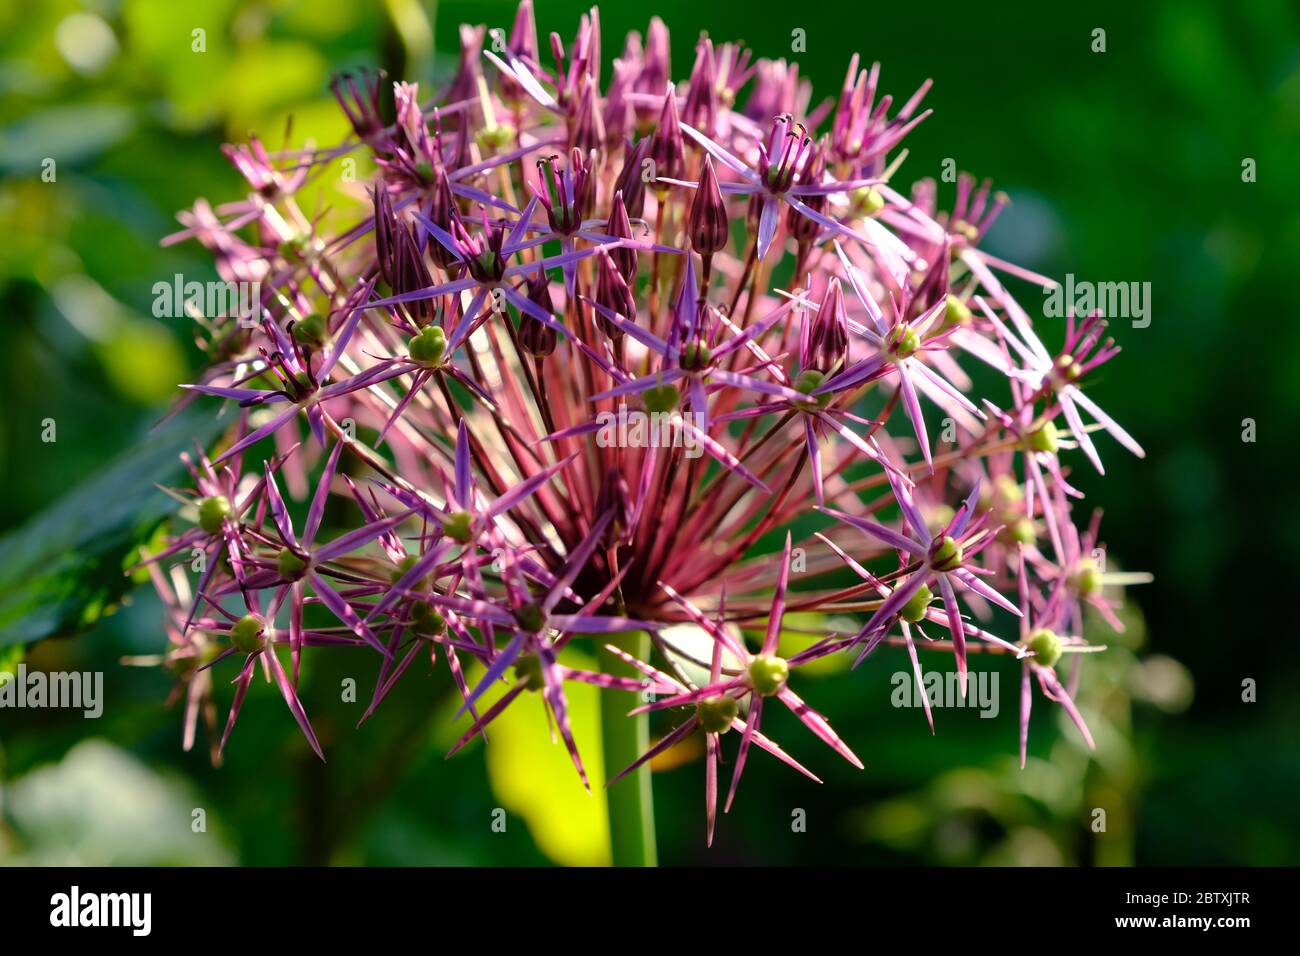 Allium, Ornamental Flower, Macro, Herbaceous, Cultivation, Globe, Sessile Leaves, Perennials, Amaryllidaceae, Alloideae, Country Garden, Cheshire. Stock Photo